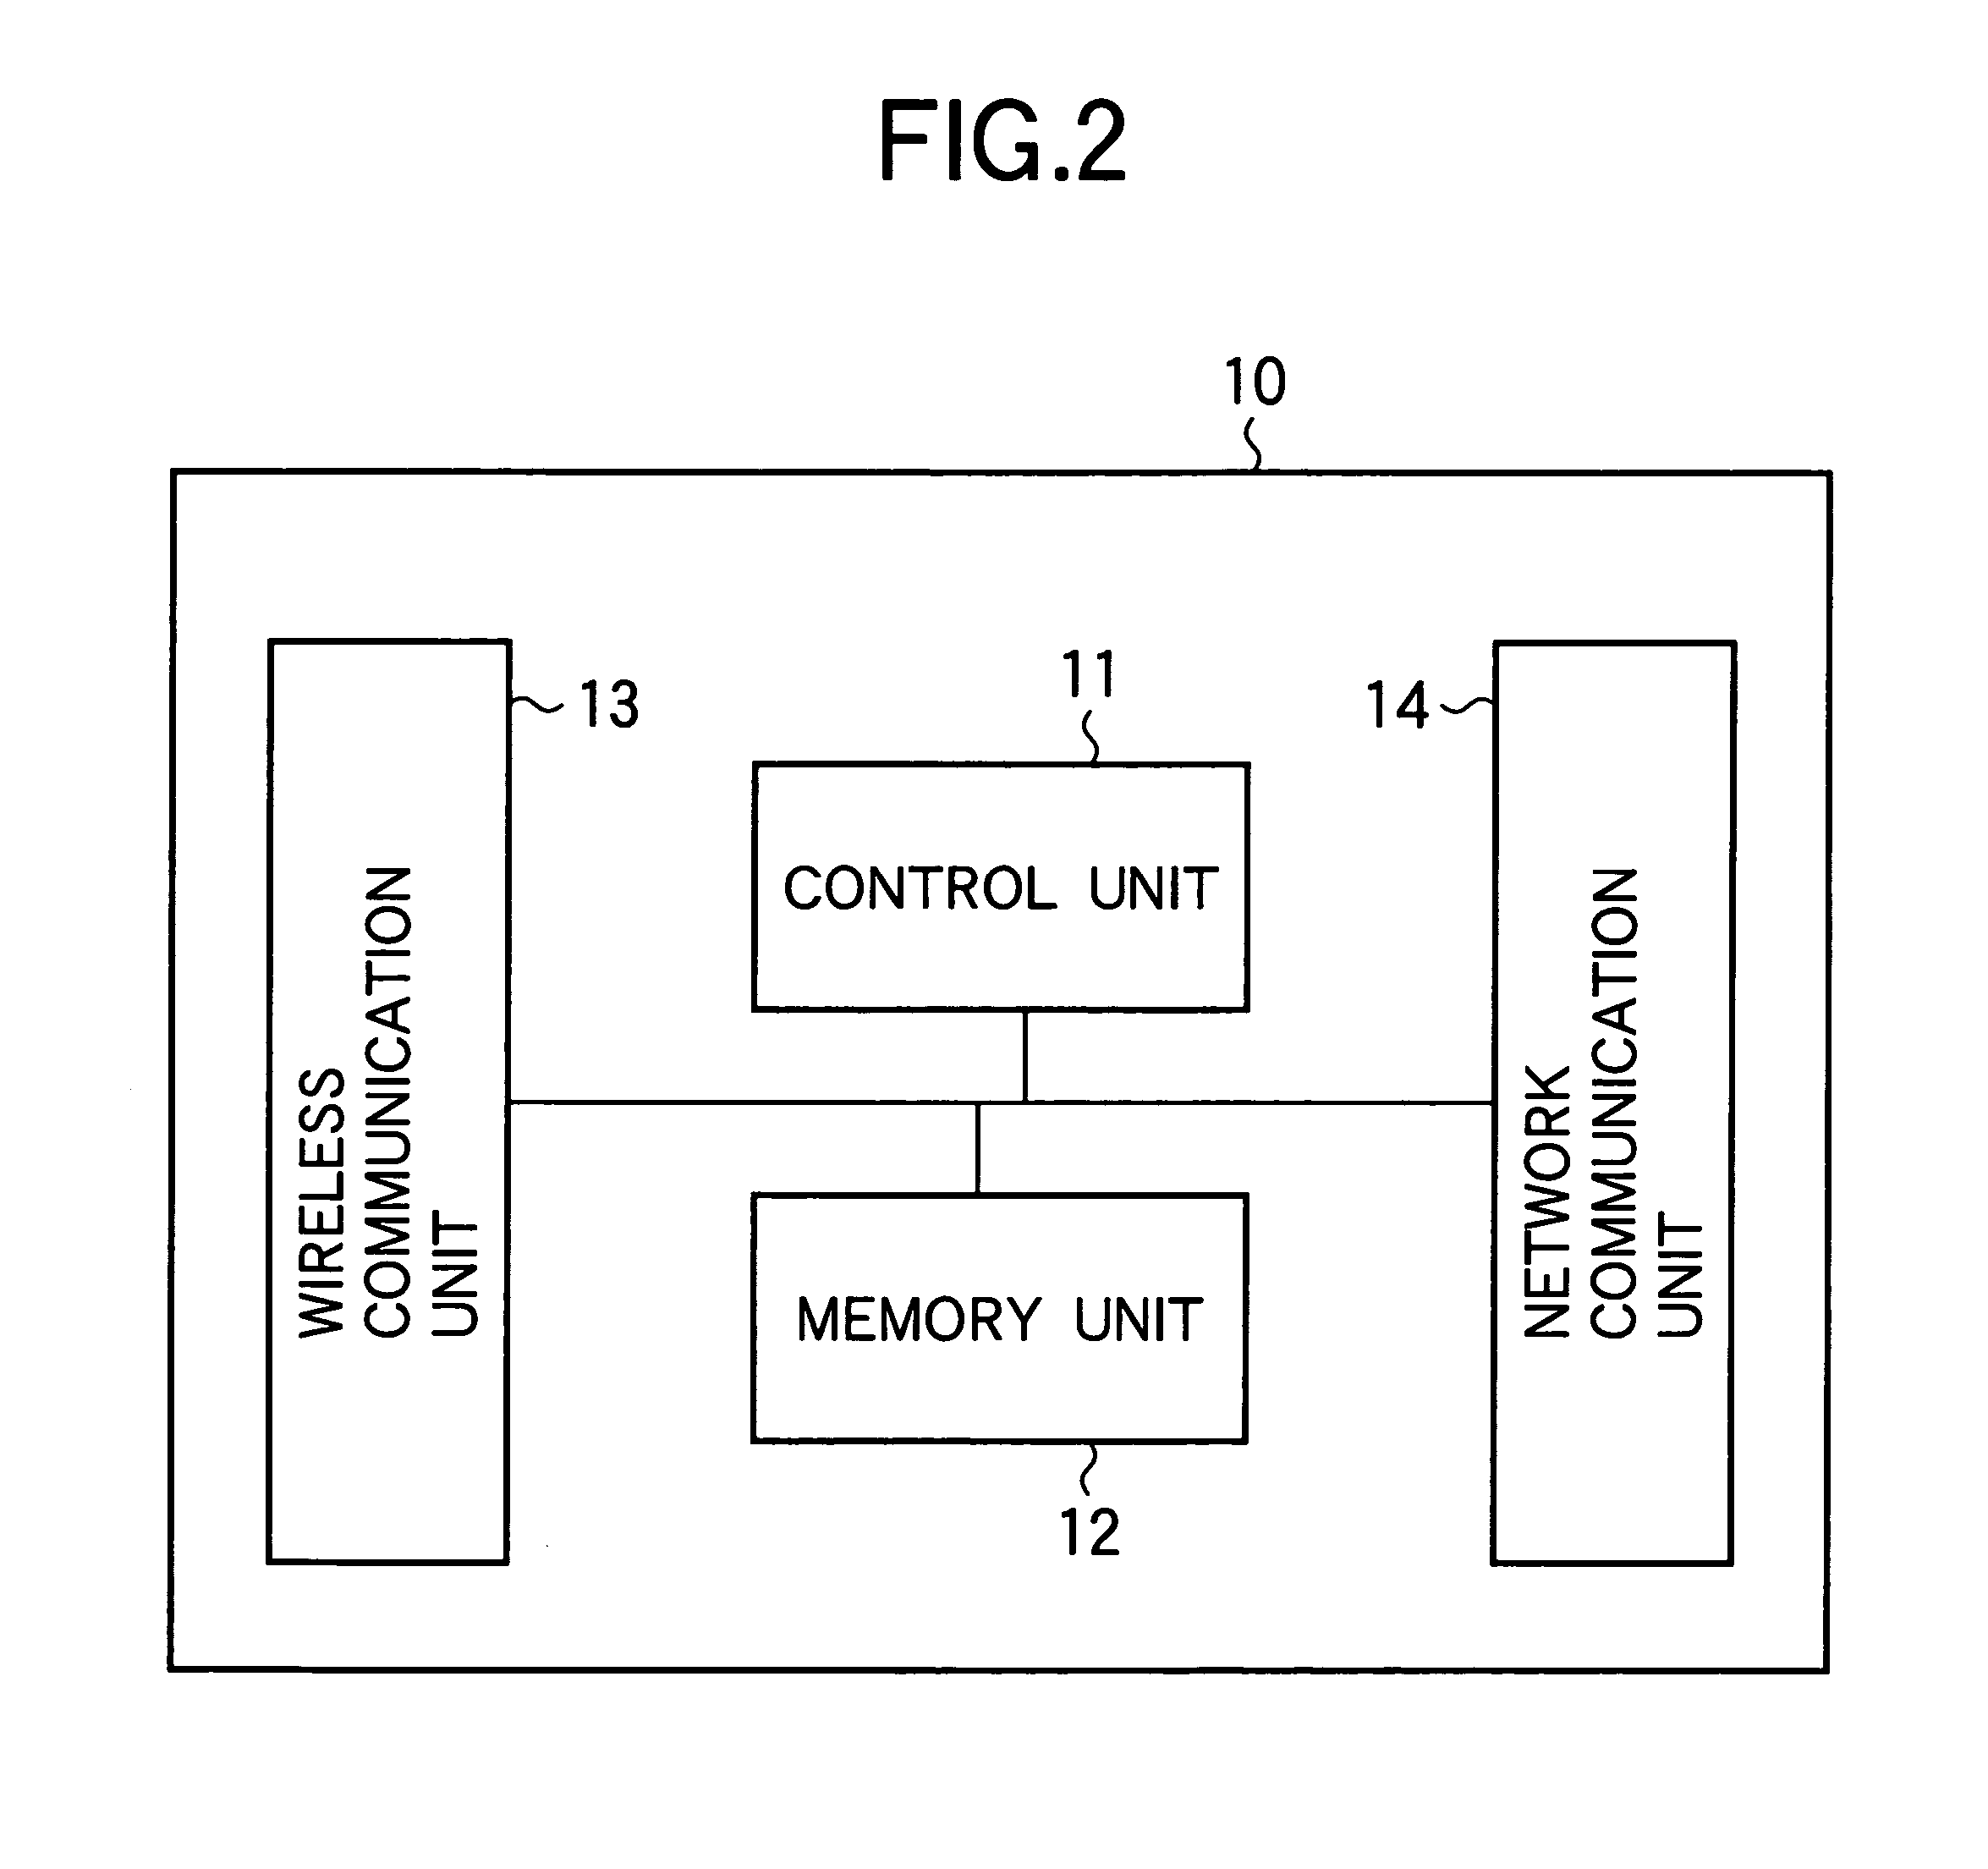 Load redistribution method and system for reducing interference in a wireless network